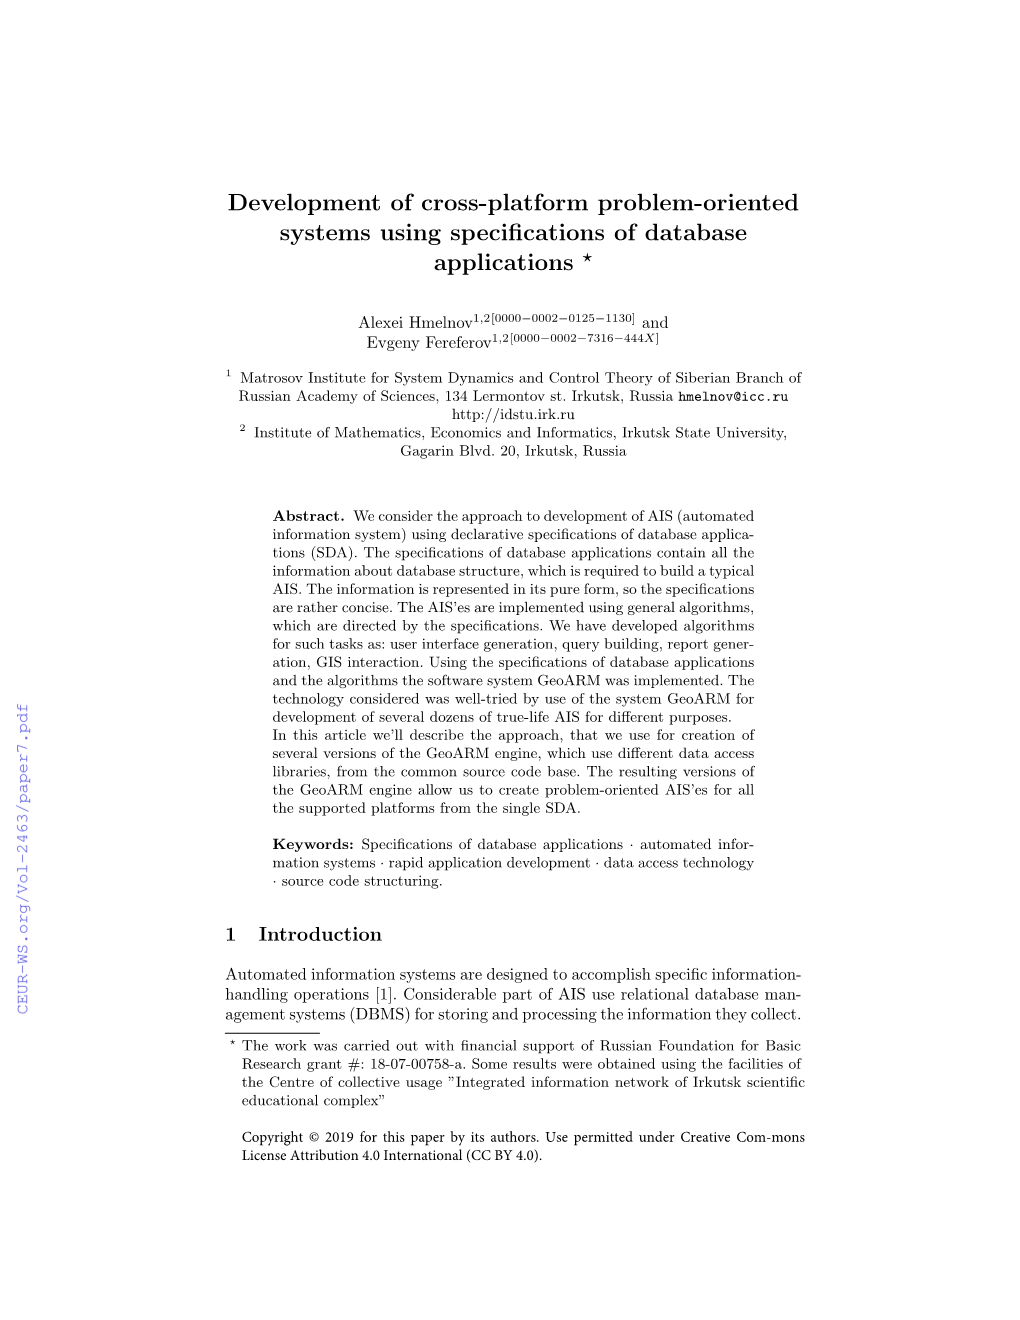 Development of Cross-Platform Problem-Oriented Systems Using Speciﬁcations of Database Applications ?